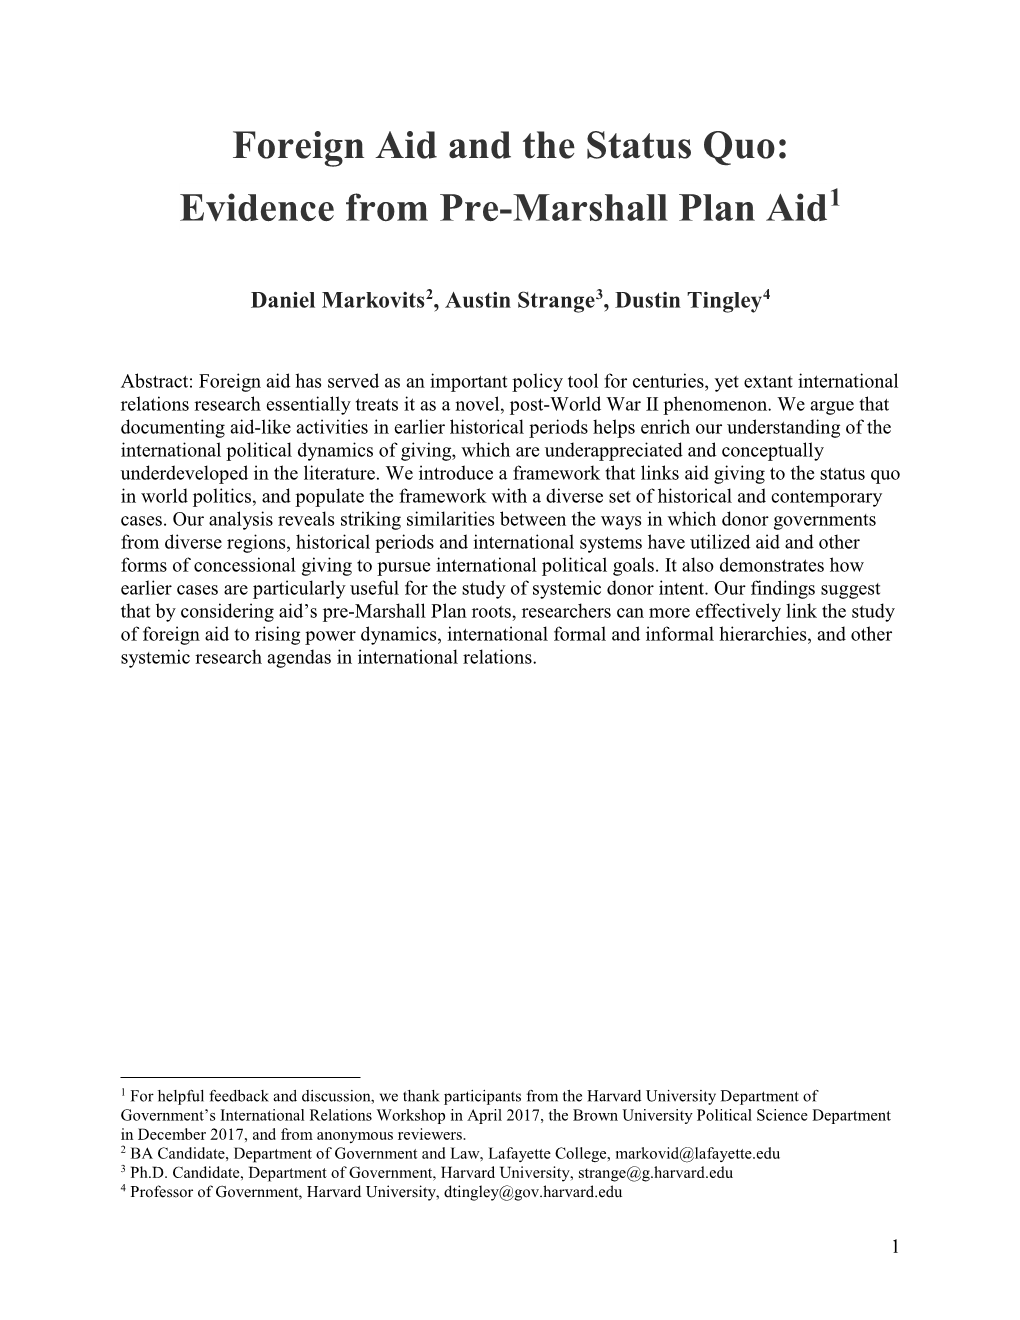 Foreign Aid and the Status Quo: Evidence from Pre-Marshall Plan Aid1